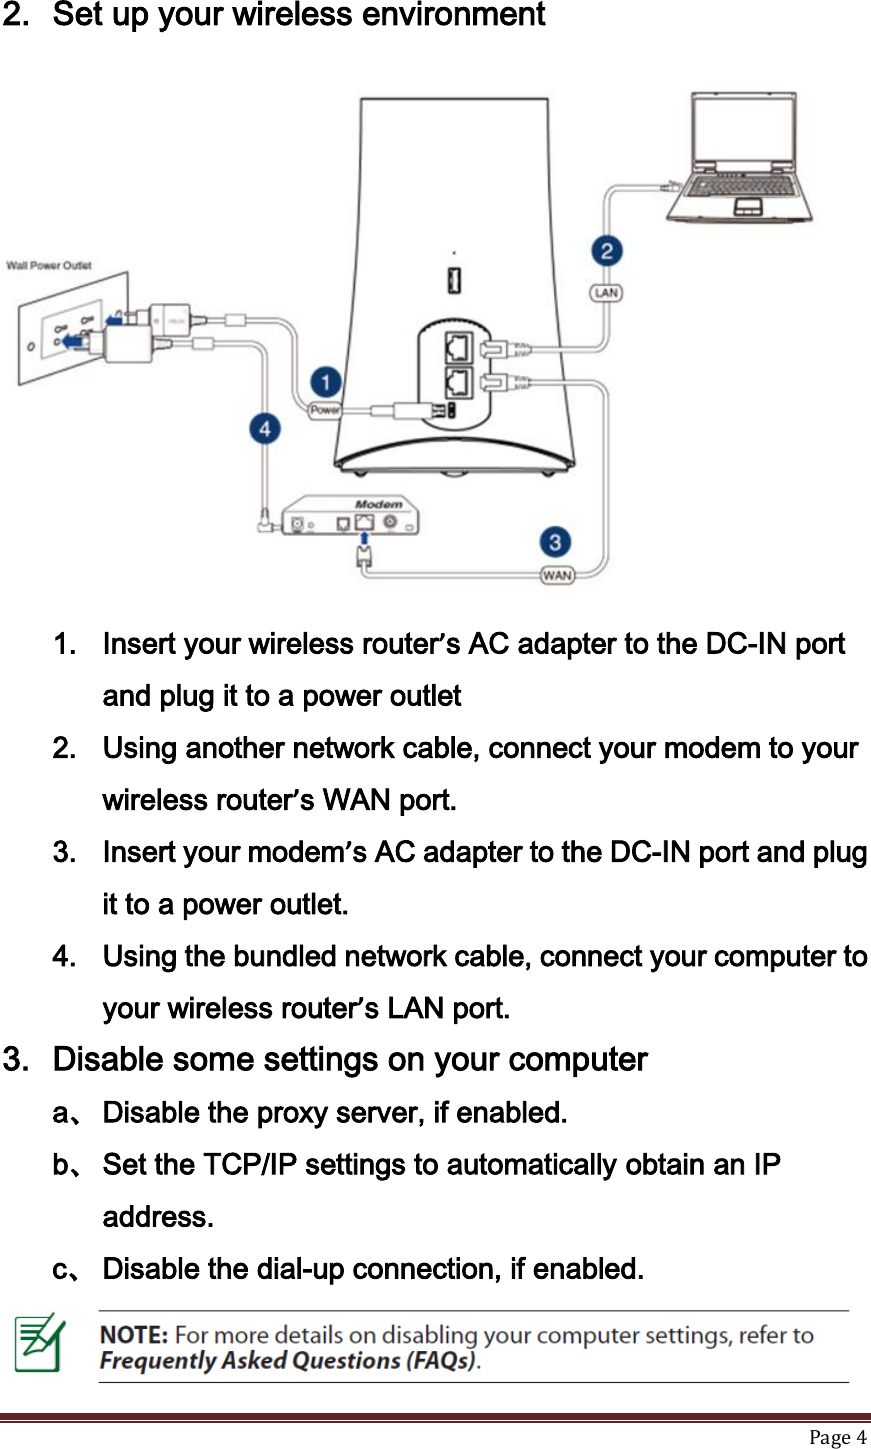   Page 4  2. Set up your wireless environment  1. Insert your wireless router’s AC adapter to the DC-IN port and plug it to a power outlet 2. Using another network cable, connect your modem to your wireless router’s WAN port. 3. Insert your modem’s AC adapter to the DC-IN port and plug it to a power outlet. 4. Using the bundled network cable, connect your computer to your wireless router’s LAN port.   3. Disable some settings on your computer a、 Disable the proxy server, if enabled. b、 Set the TCP/IP settings to automatically obtain an IP address. c、 Disable the dial-up connection, if enabled.  